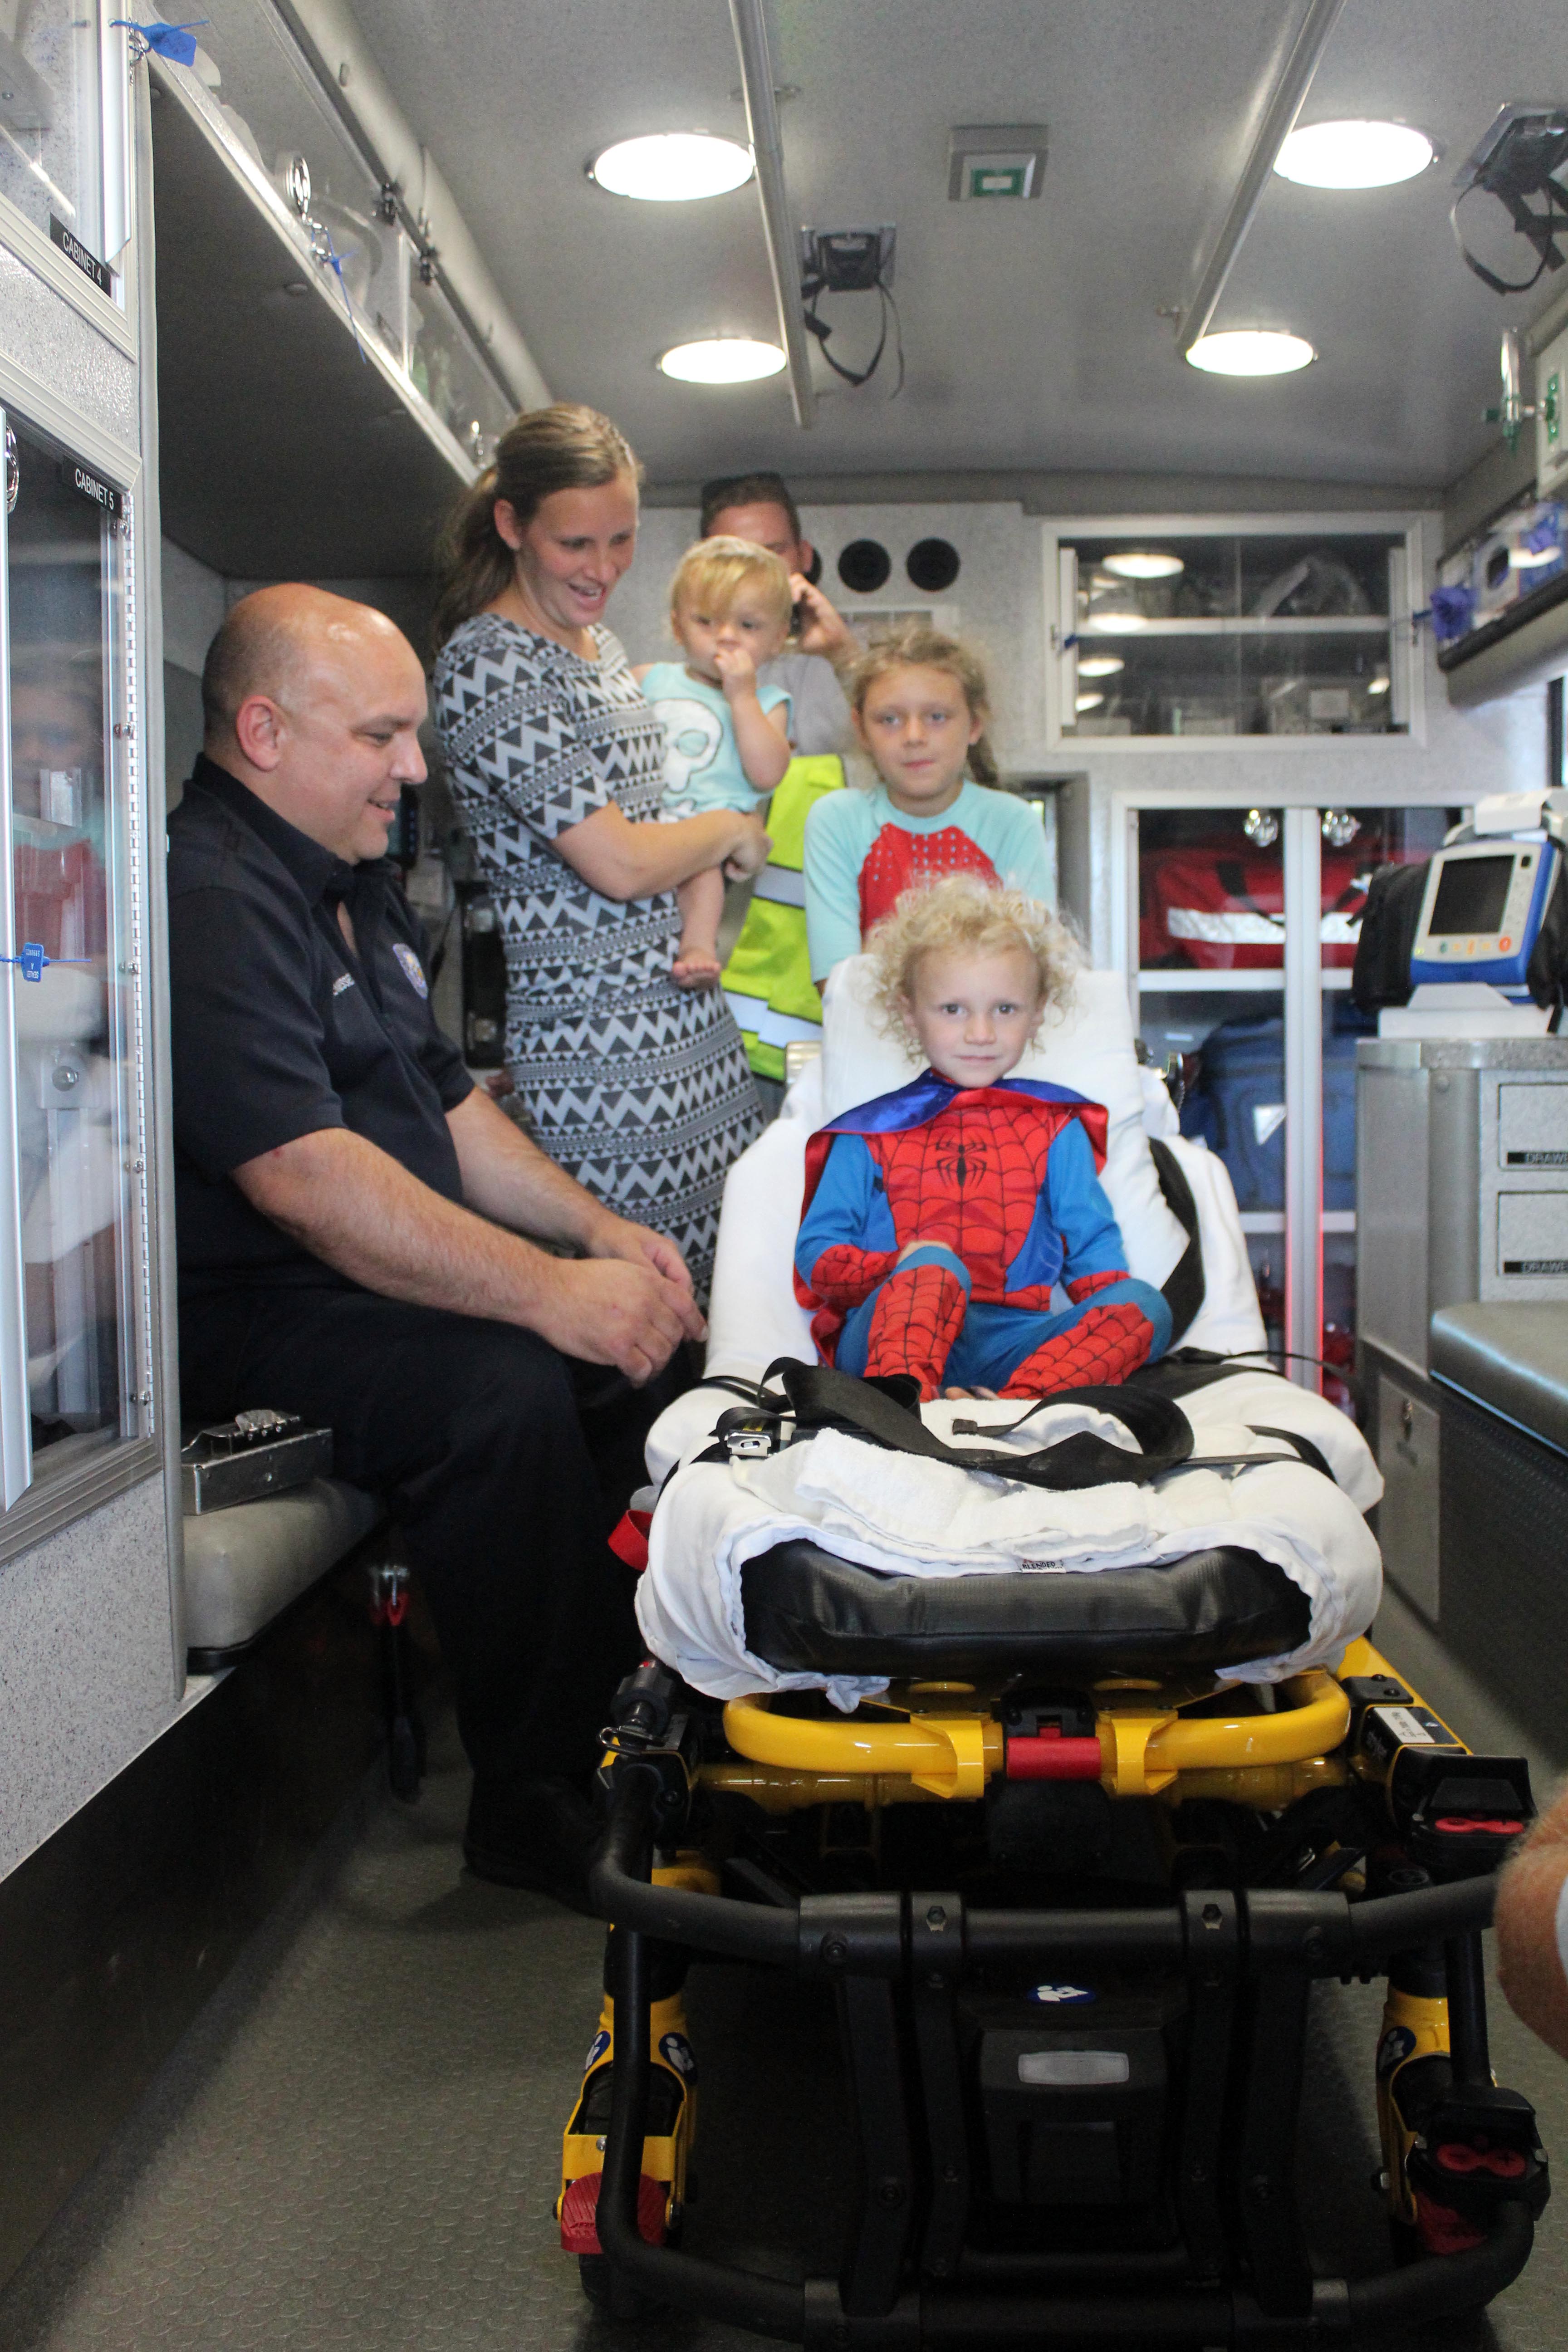 Boy who nearly drowned visits fire station